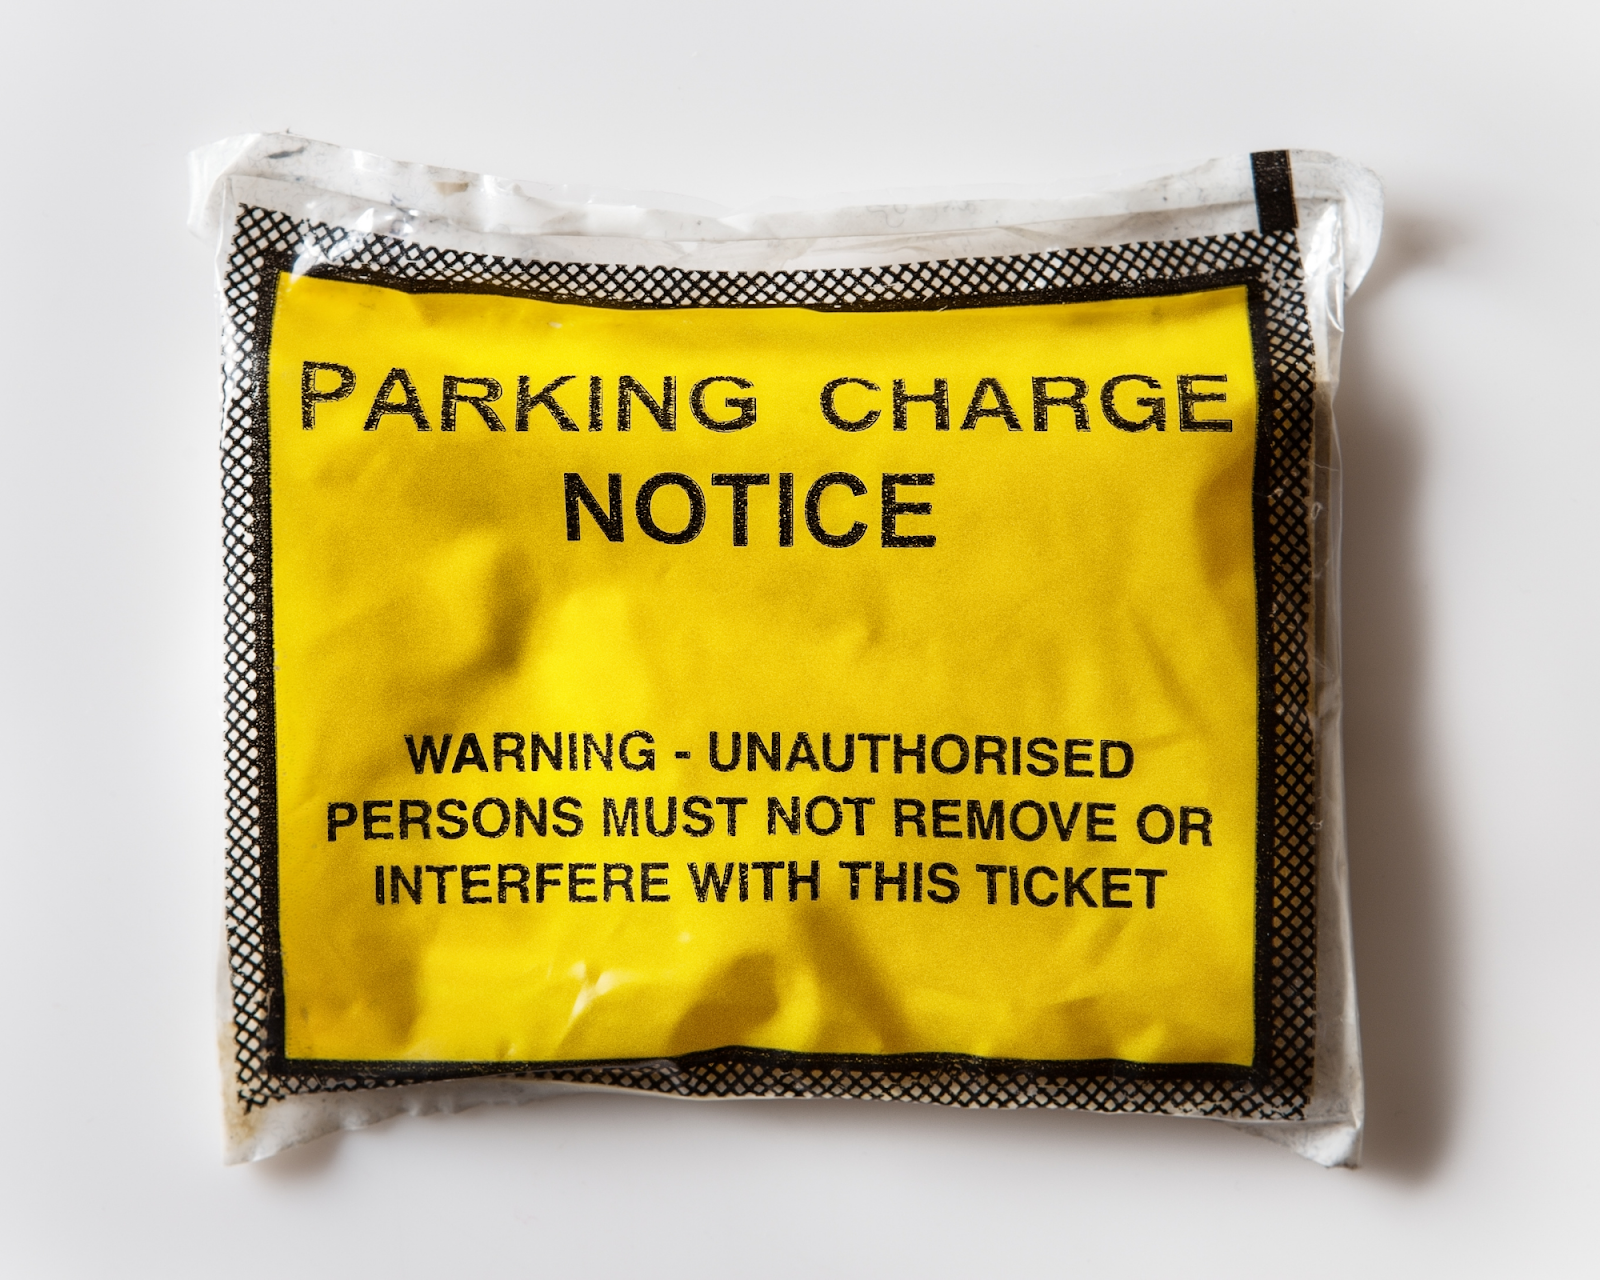 Parking charge notice